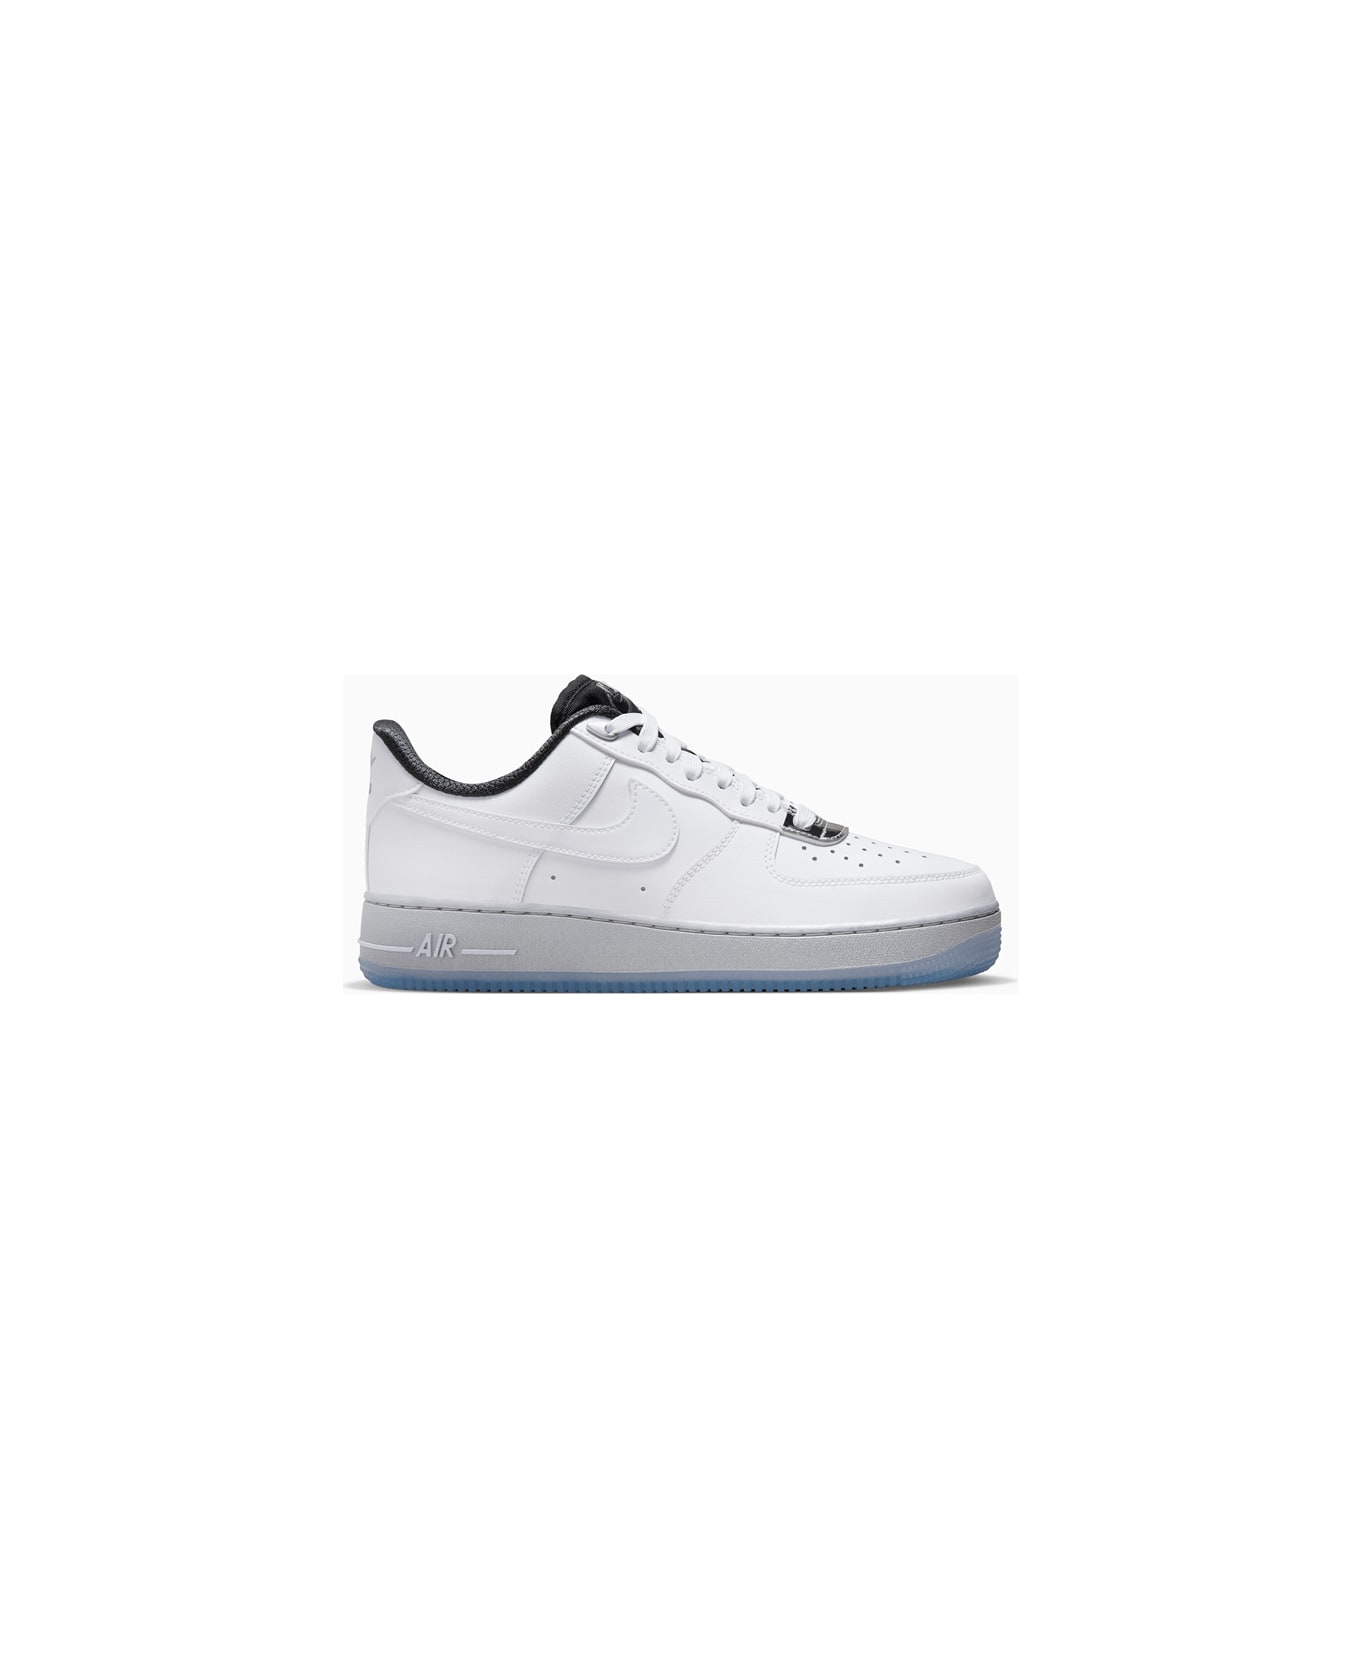 Nike Air Force 1 '07 Se (w) Sneakers Dx6764-100 - White スニーカー